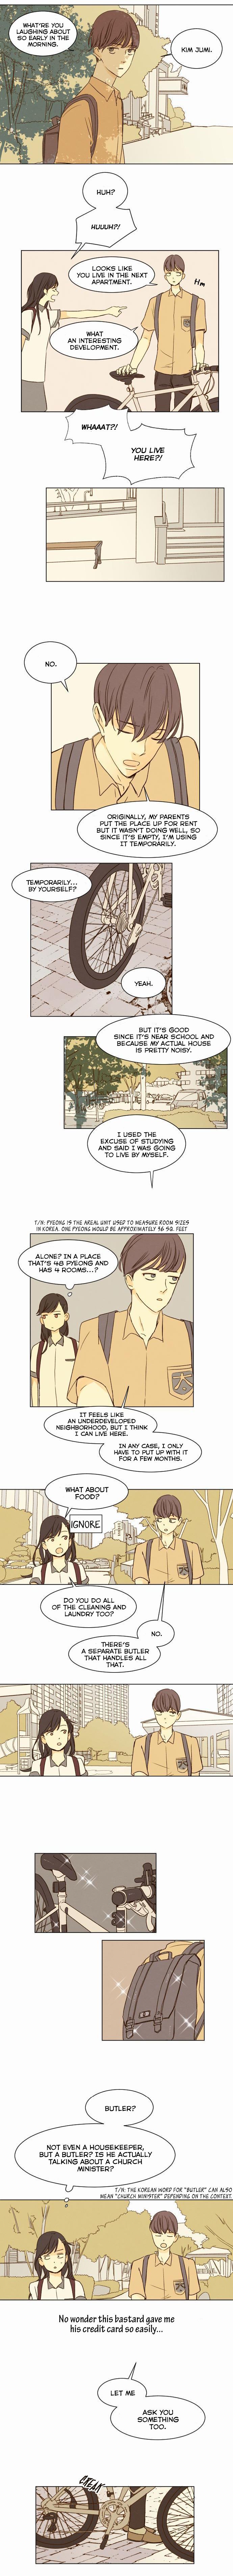 That Summer (KIM Hyun) Chapter 006 page 5